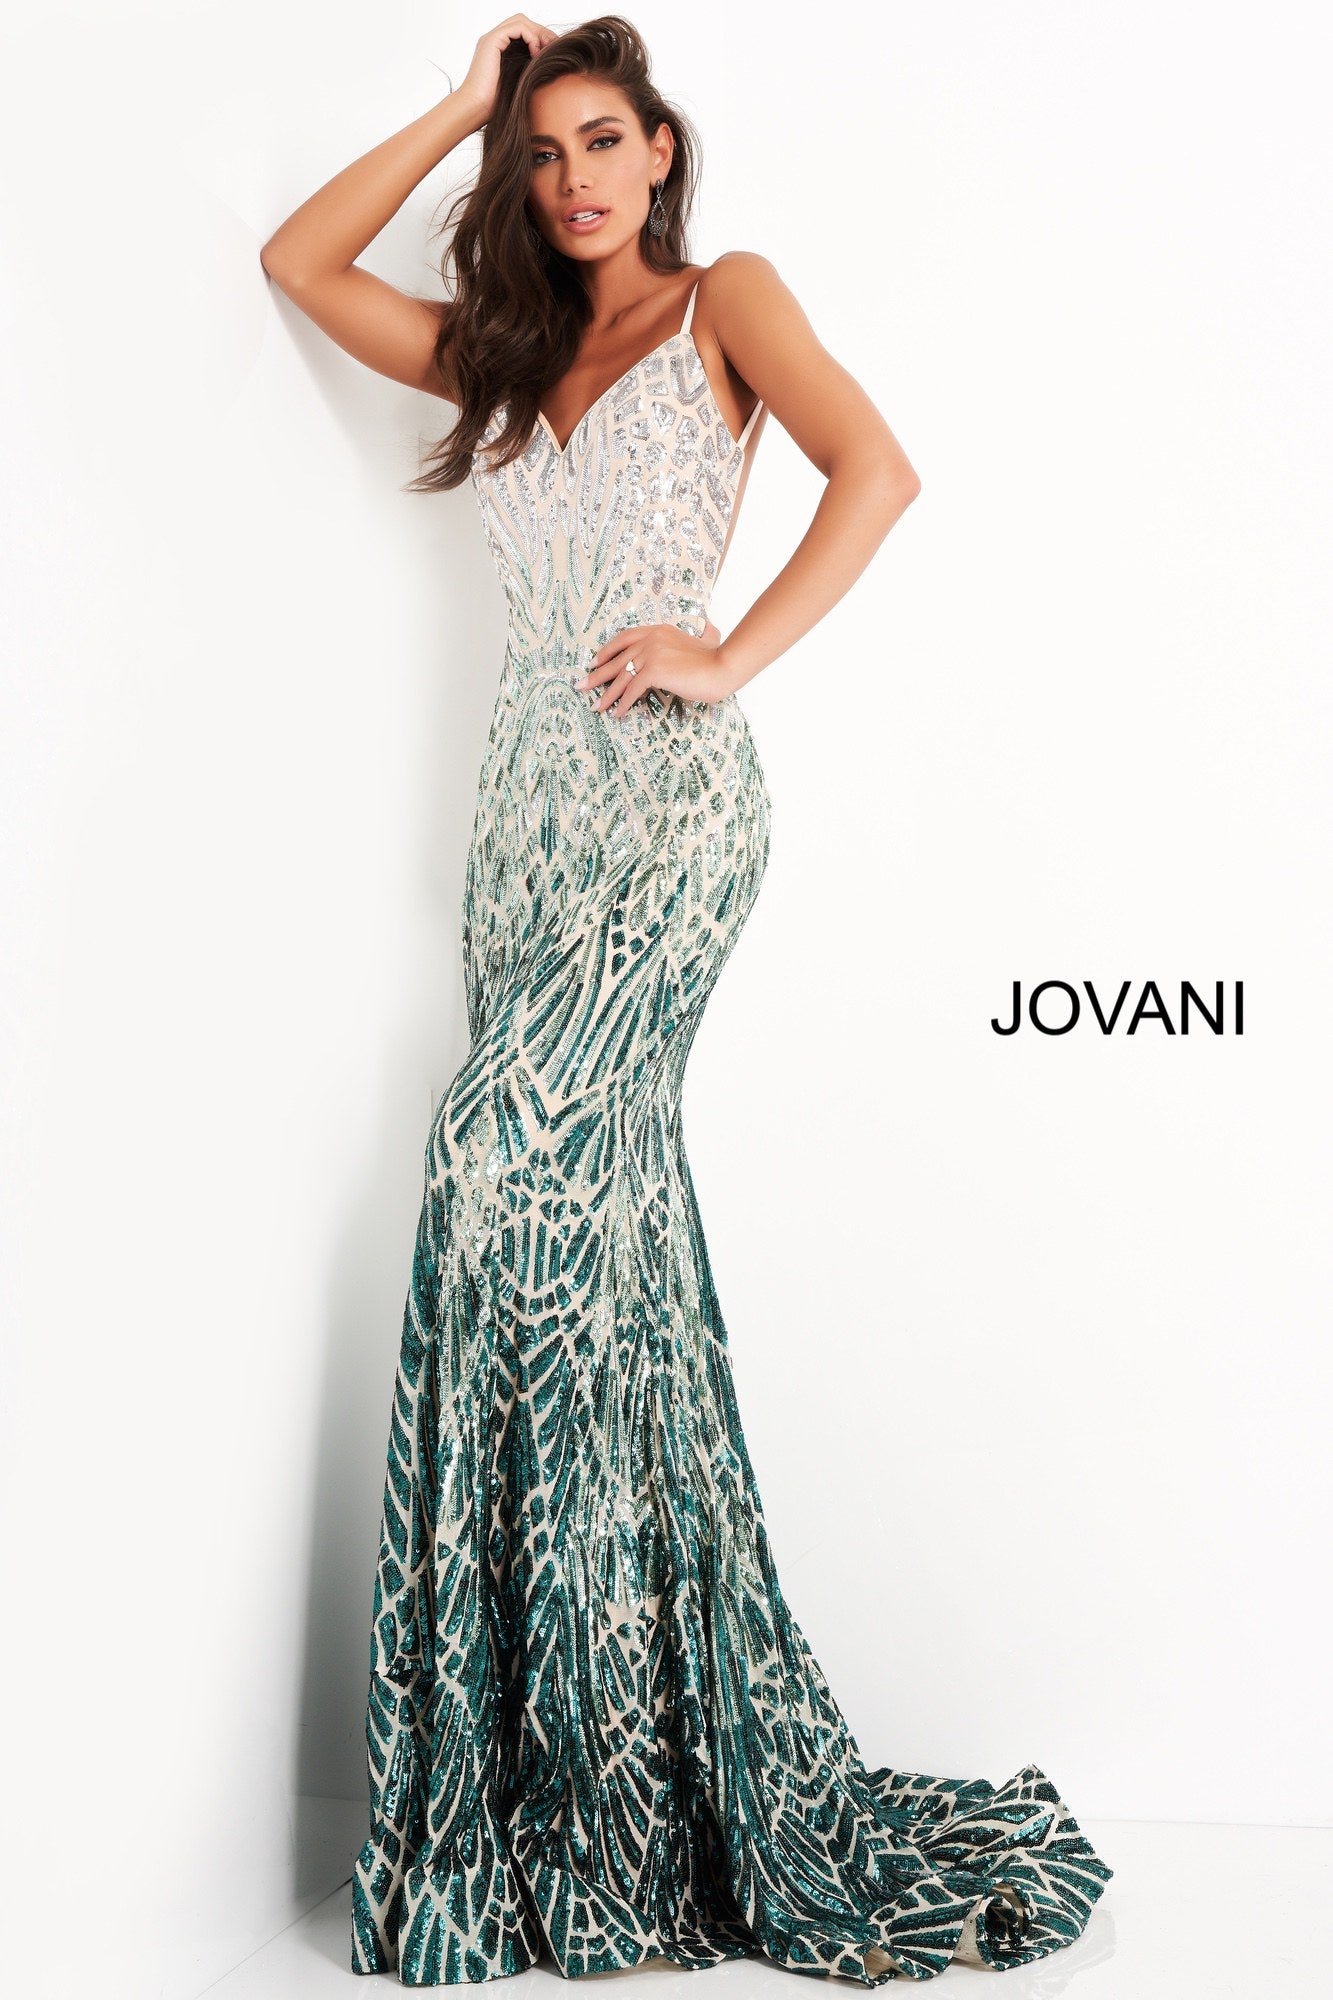 Jovani 06450 is a Gorgeous Long Fitted mermaid Formal evening gown. This Prom Dress Features an open Back with spaghetti straps. Ombre Sequin Color Shift on this Mermaid Pageant Dress. Lush Trumpet skirt with a sweeping train. Fully Embellished sequin Geometric pattern to accentuate any figure! Available Sizes: 00,0,2,4,6,8,10,12,14,16,18,20,22,24 Available Colors: silver/cafe, silver/green